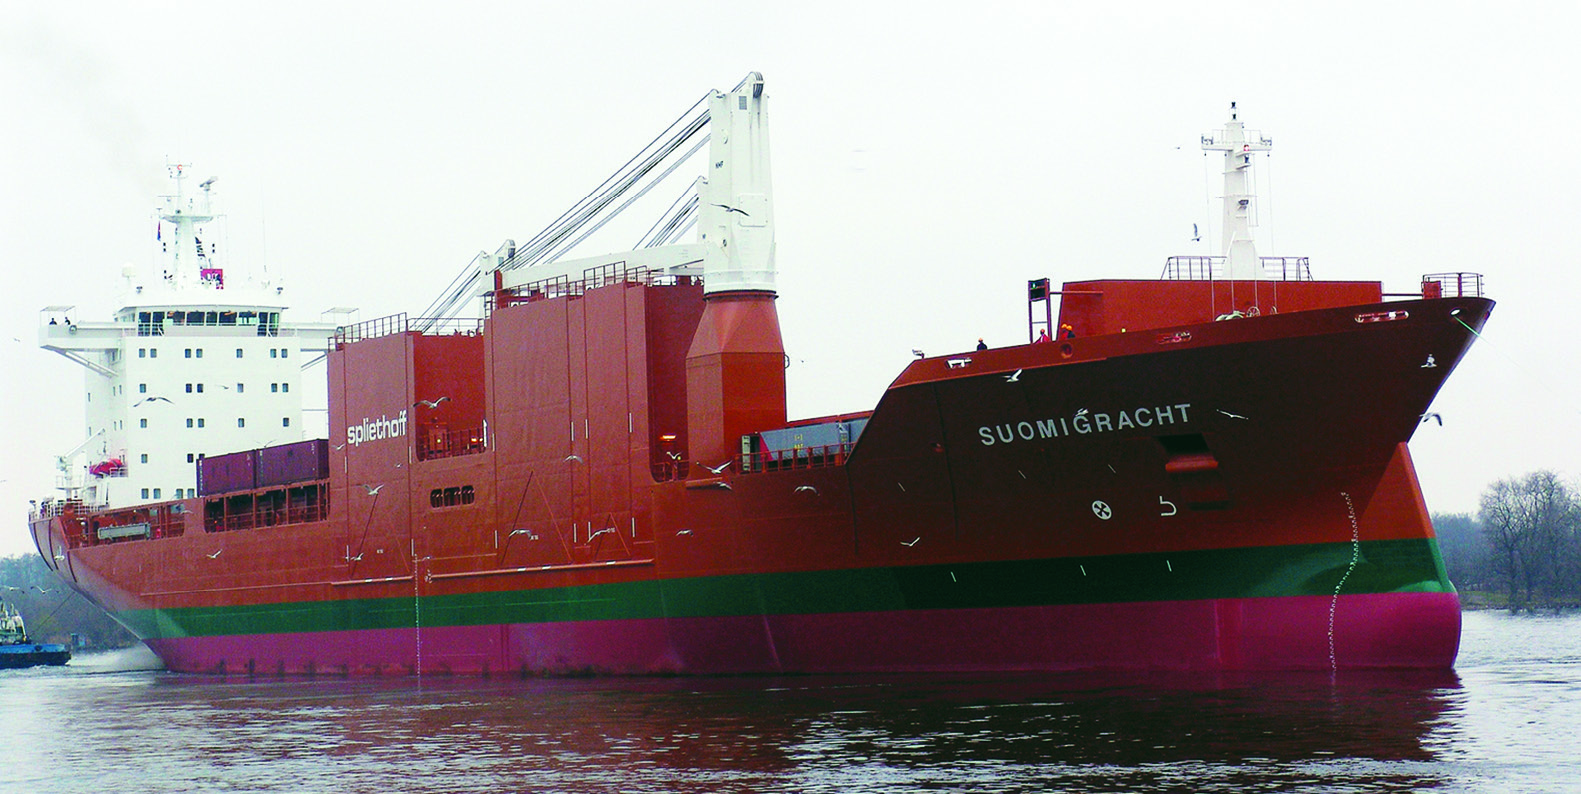 Multi-purpose/forest product carrier SUOMIGRACHT